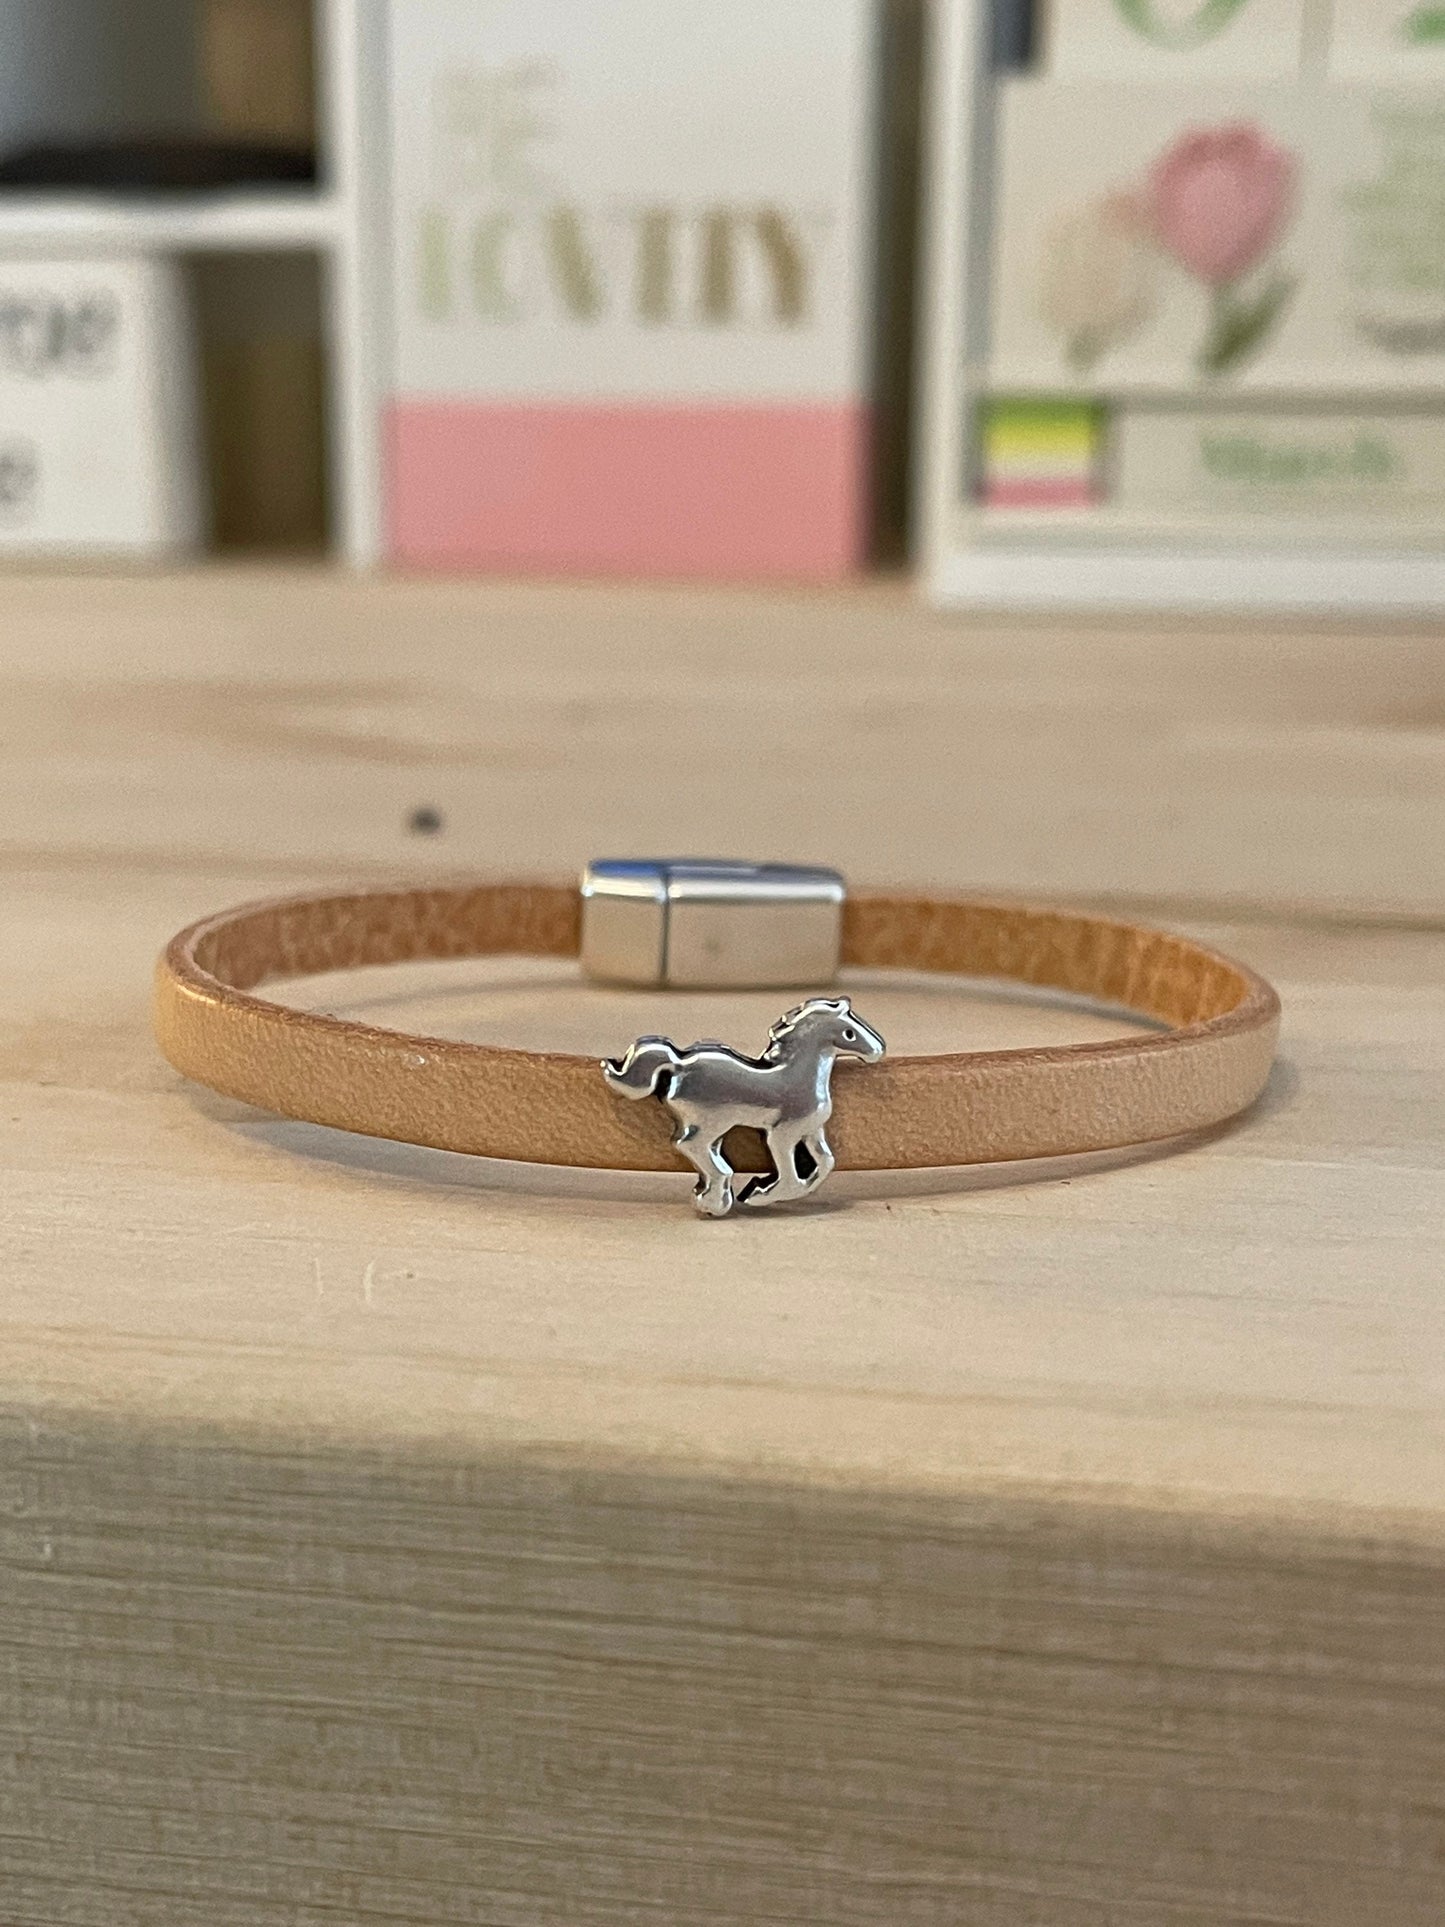 Leather and Silver (Zamak) Cuff Bracelet With Horse Slide  Charm and Locking Magnetic Closure